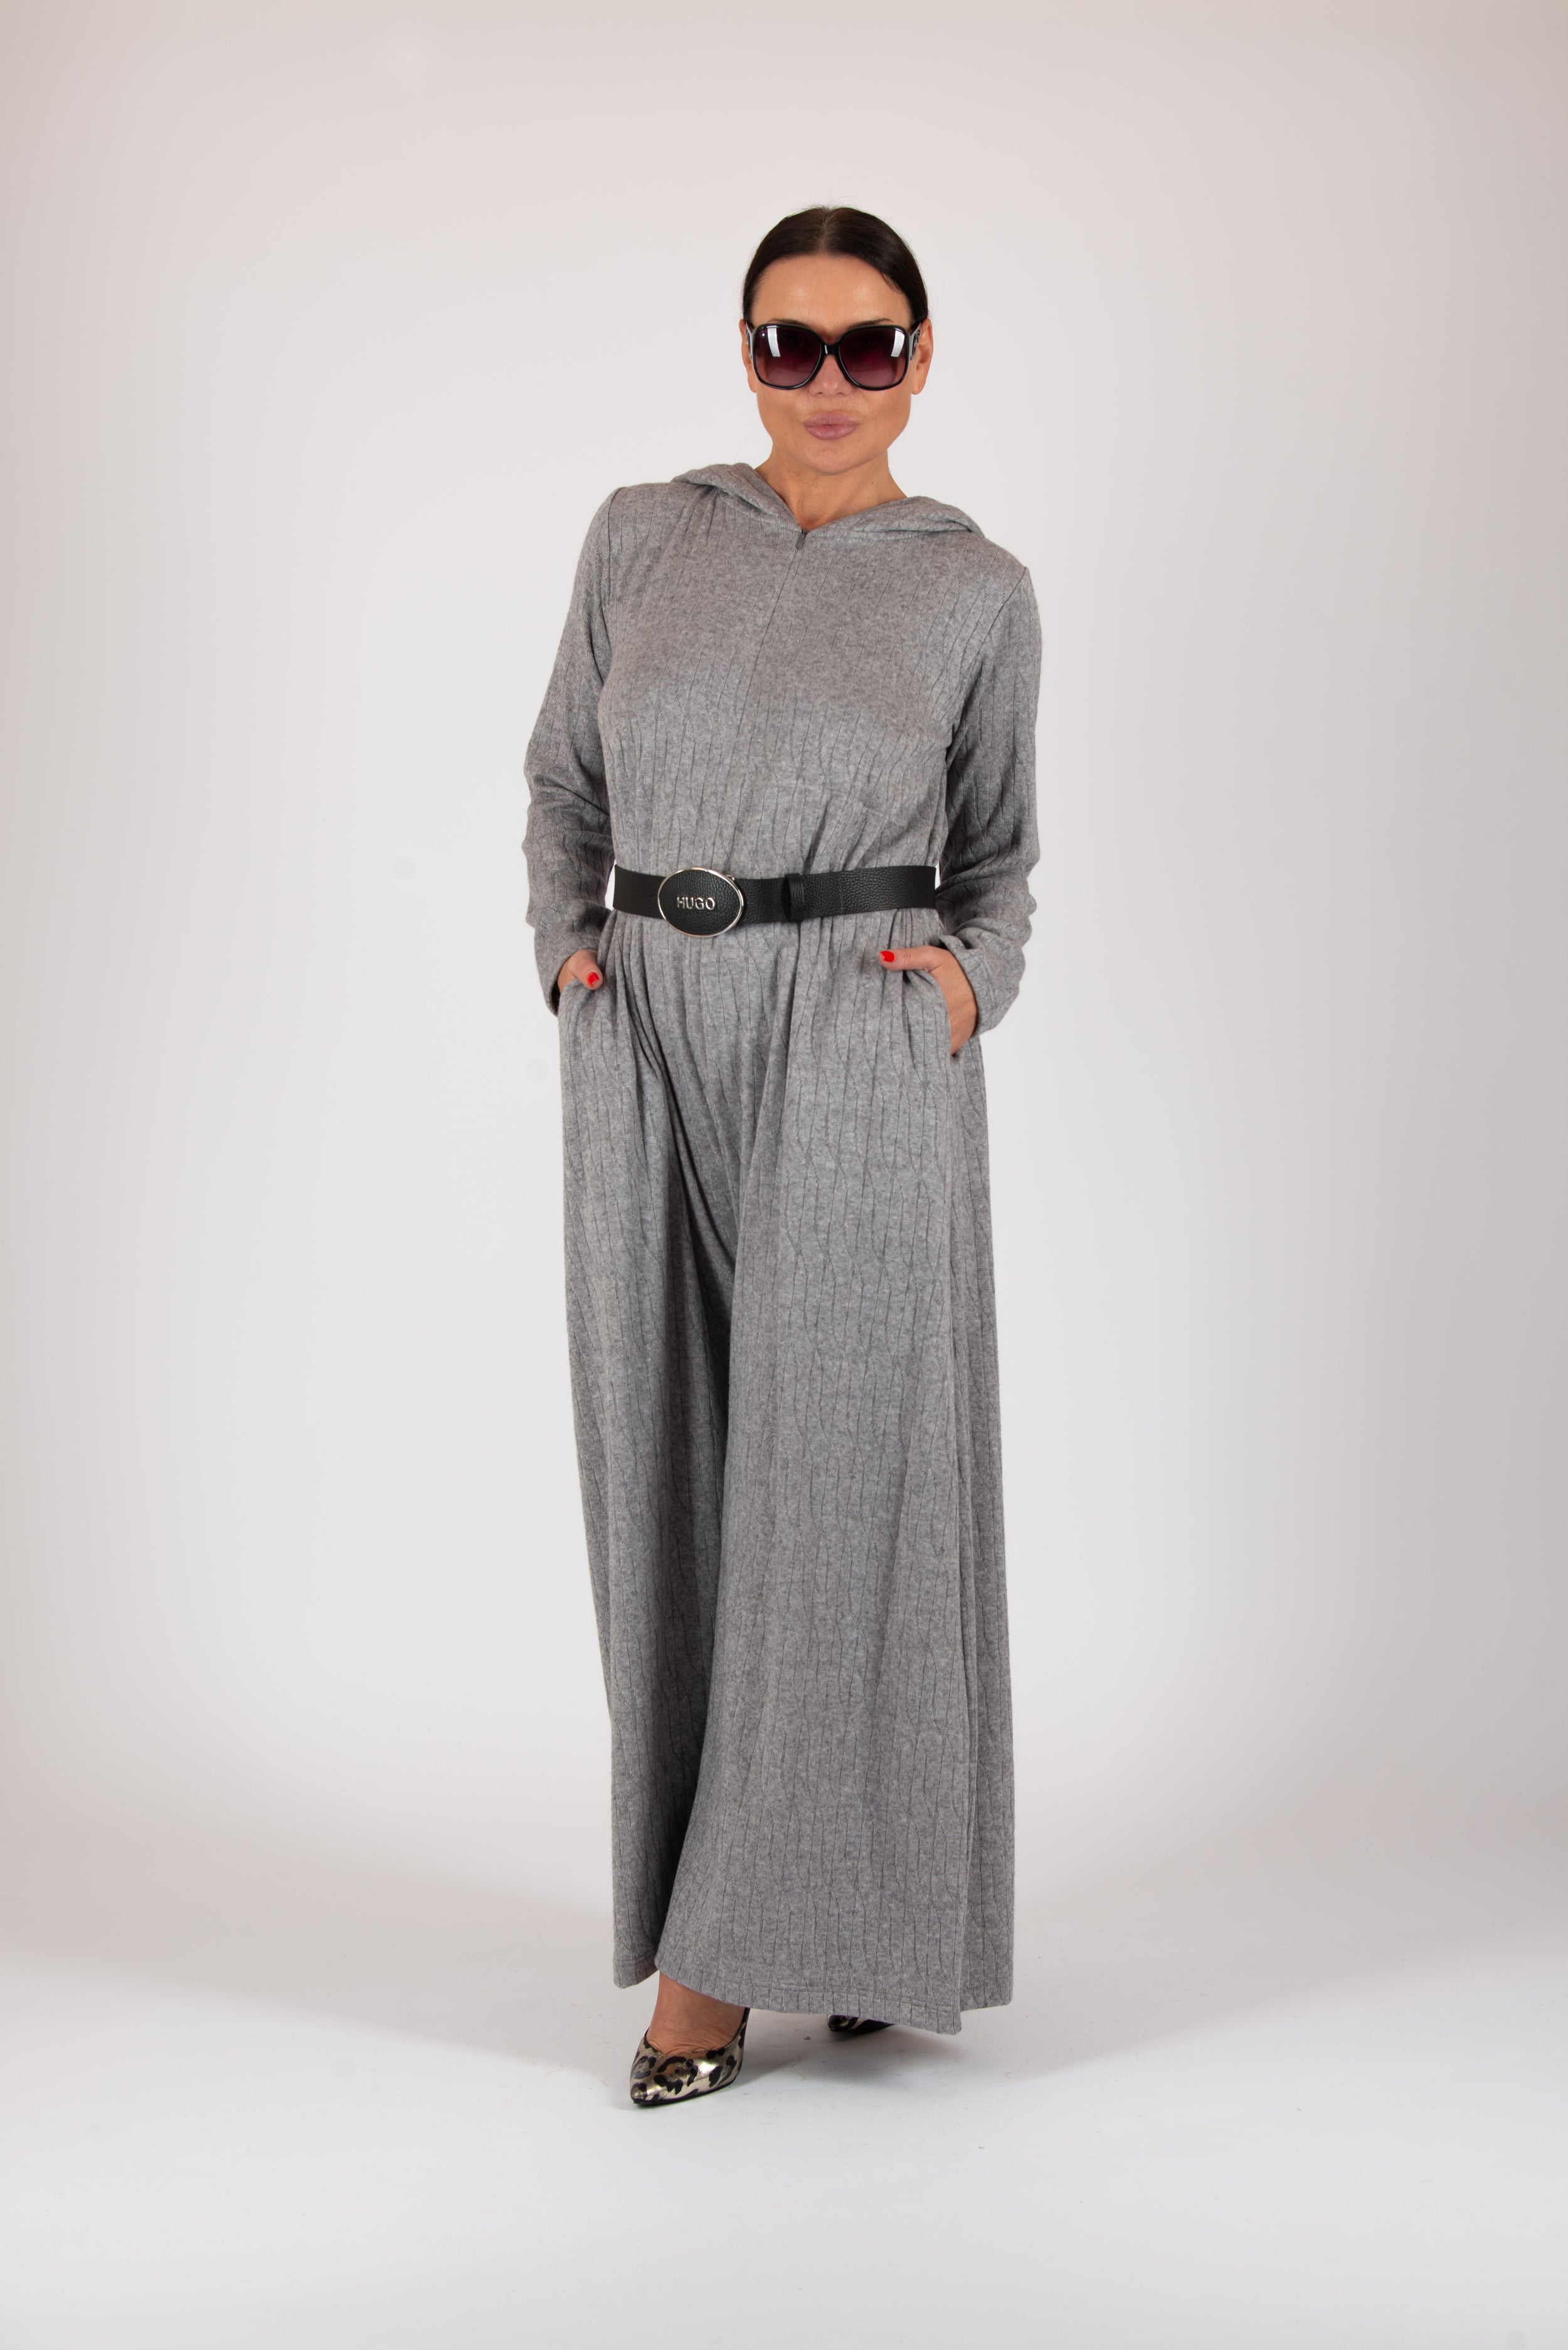 Wool Hooded Light Grey Jumpsuit by EUG Fashion